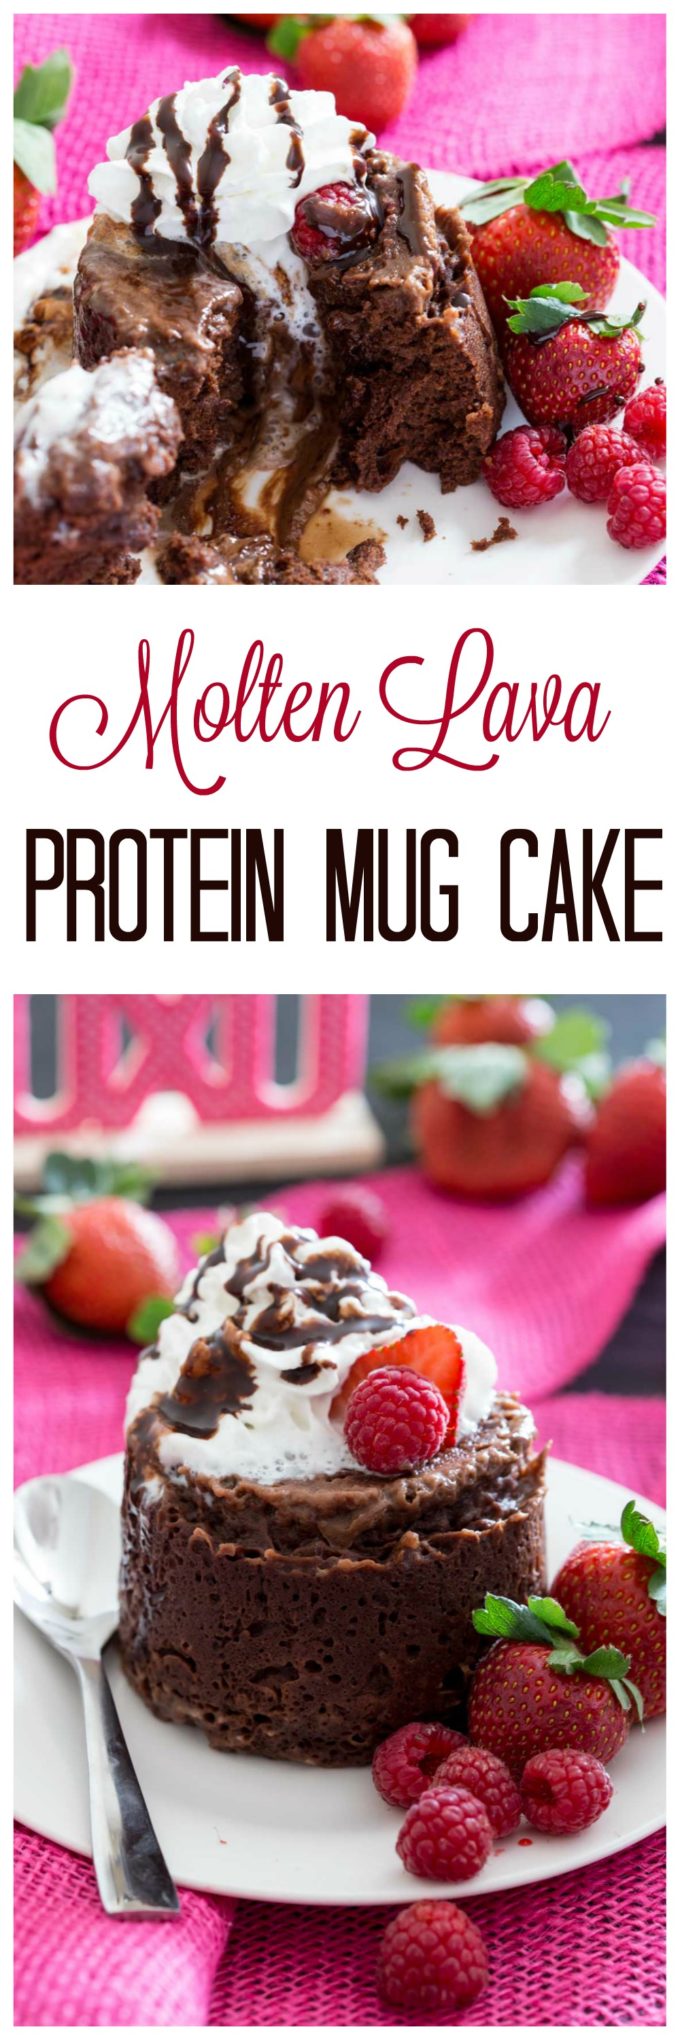 Protein packed molten lava cake you can make in a mug in the microwave